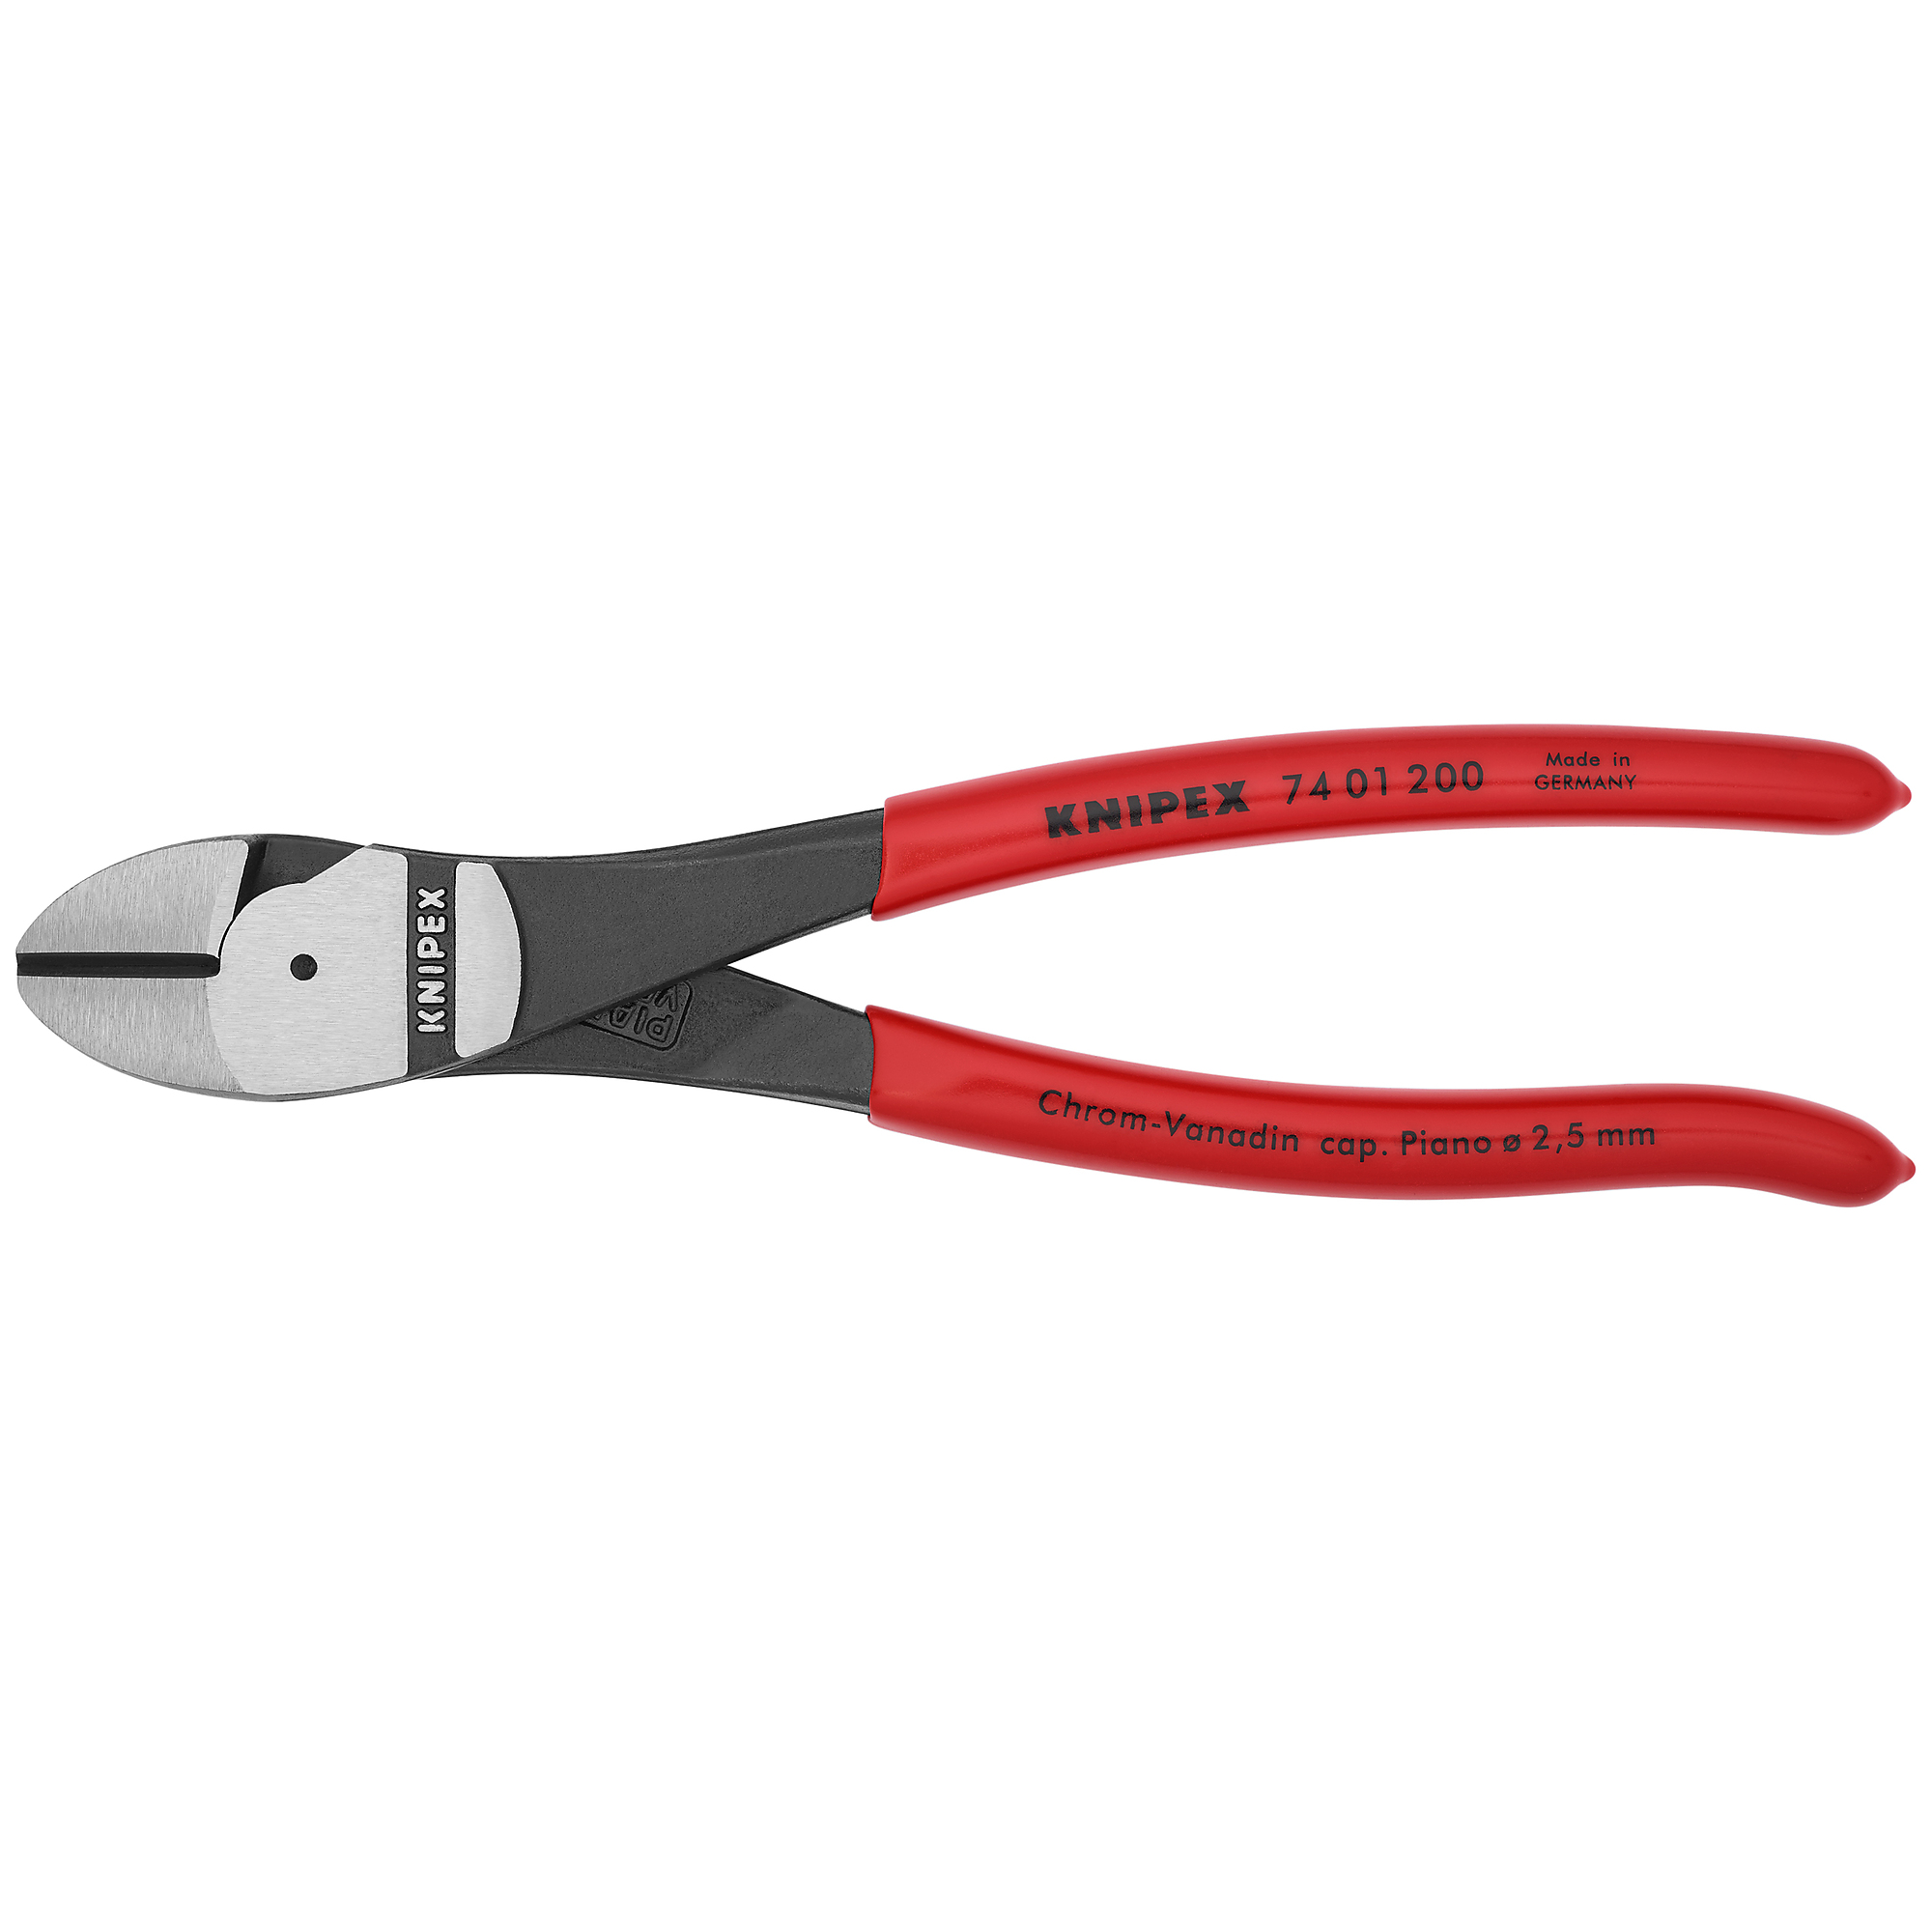 High Leverage Diagonal Cutters, 8Inch, Pieces (qty.) 1, Material Chrome Vanadium, Model - KNIPEX 74 01 200 SBA